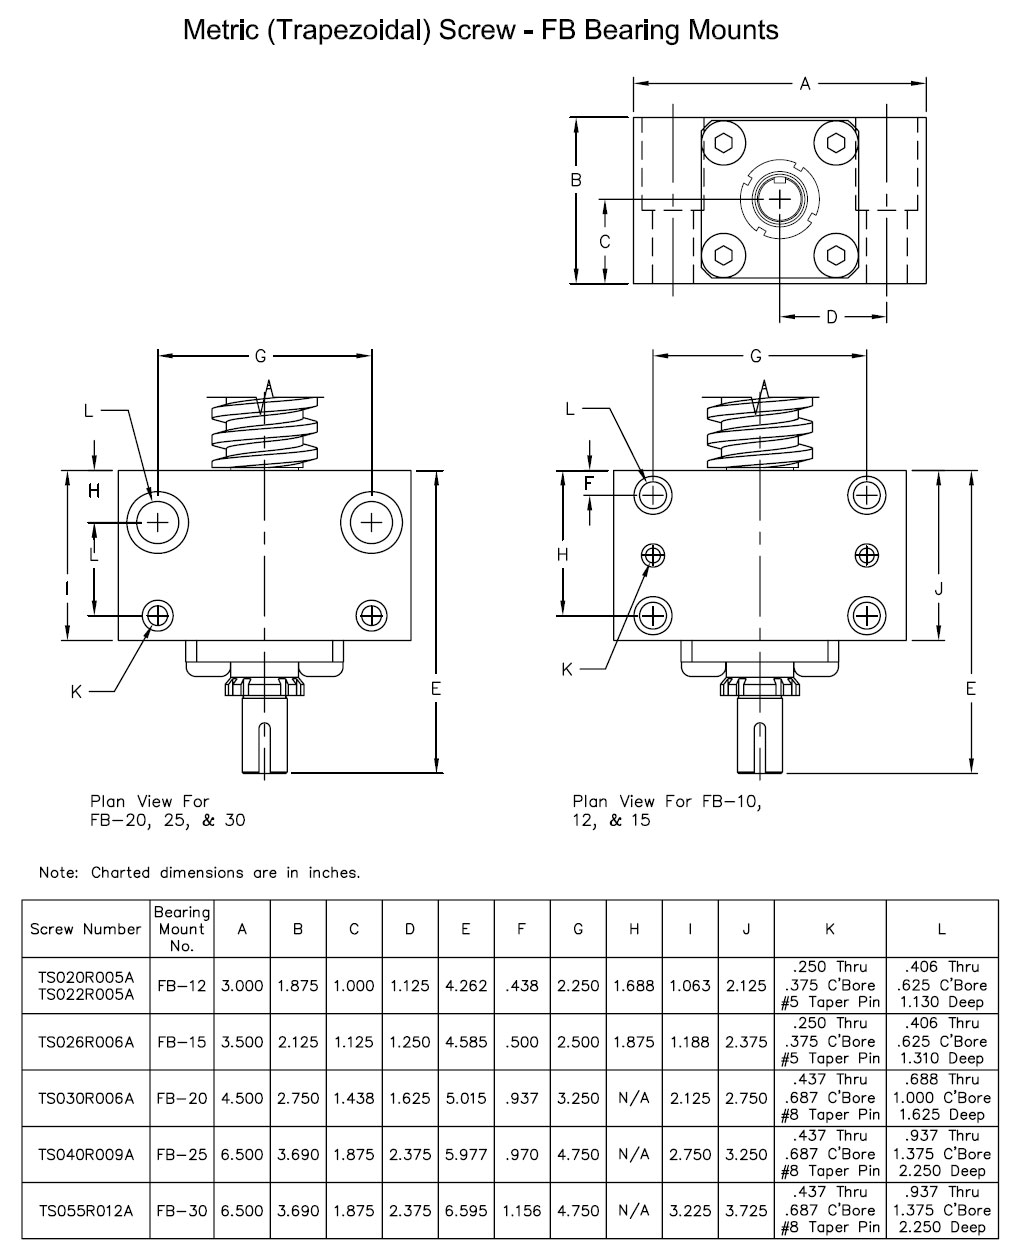 FB Bearing Blocks and Screw End Conditions